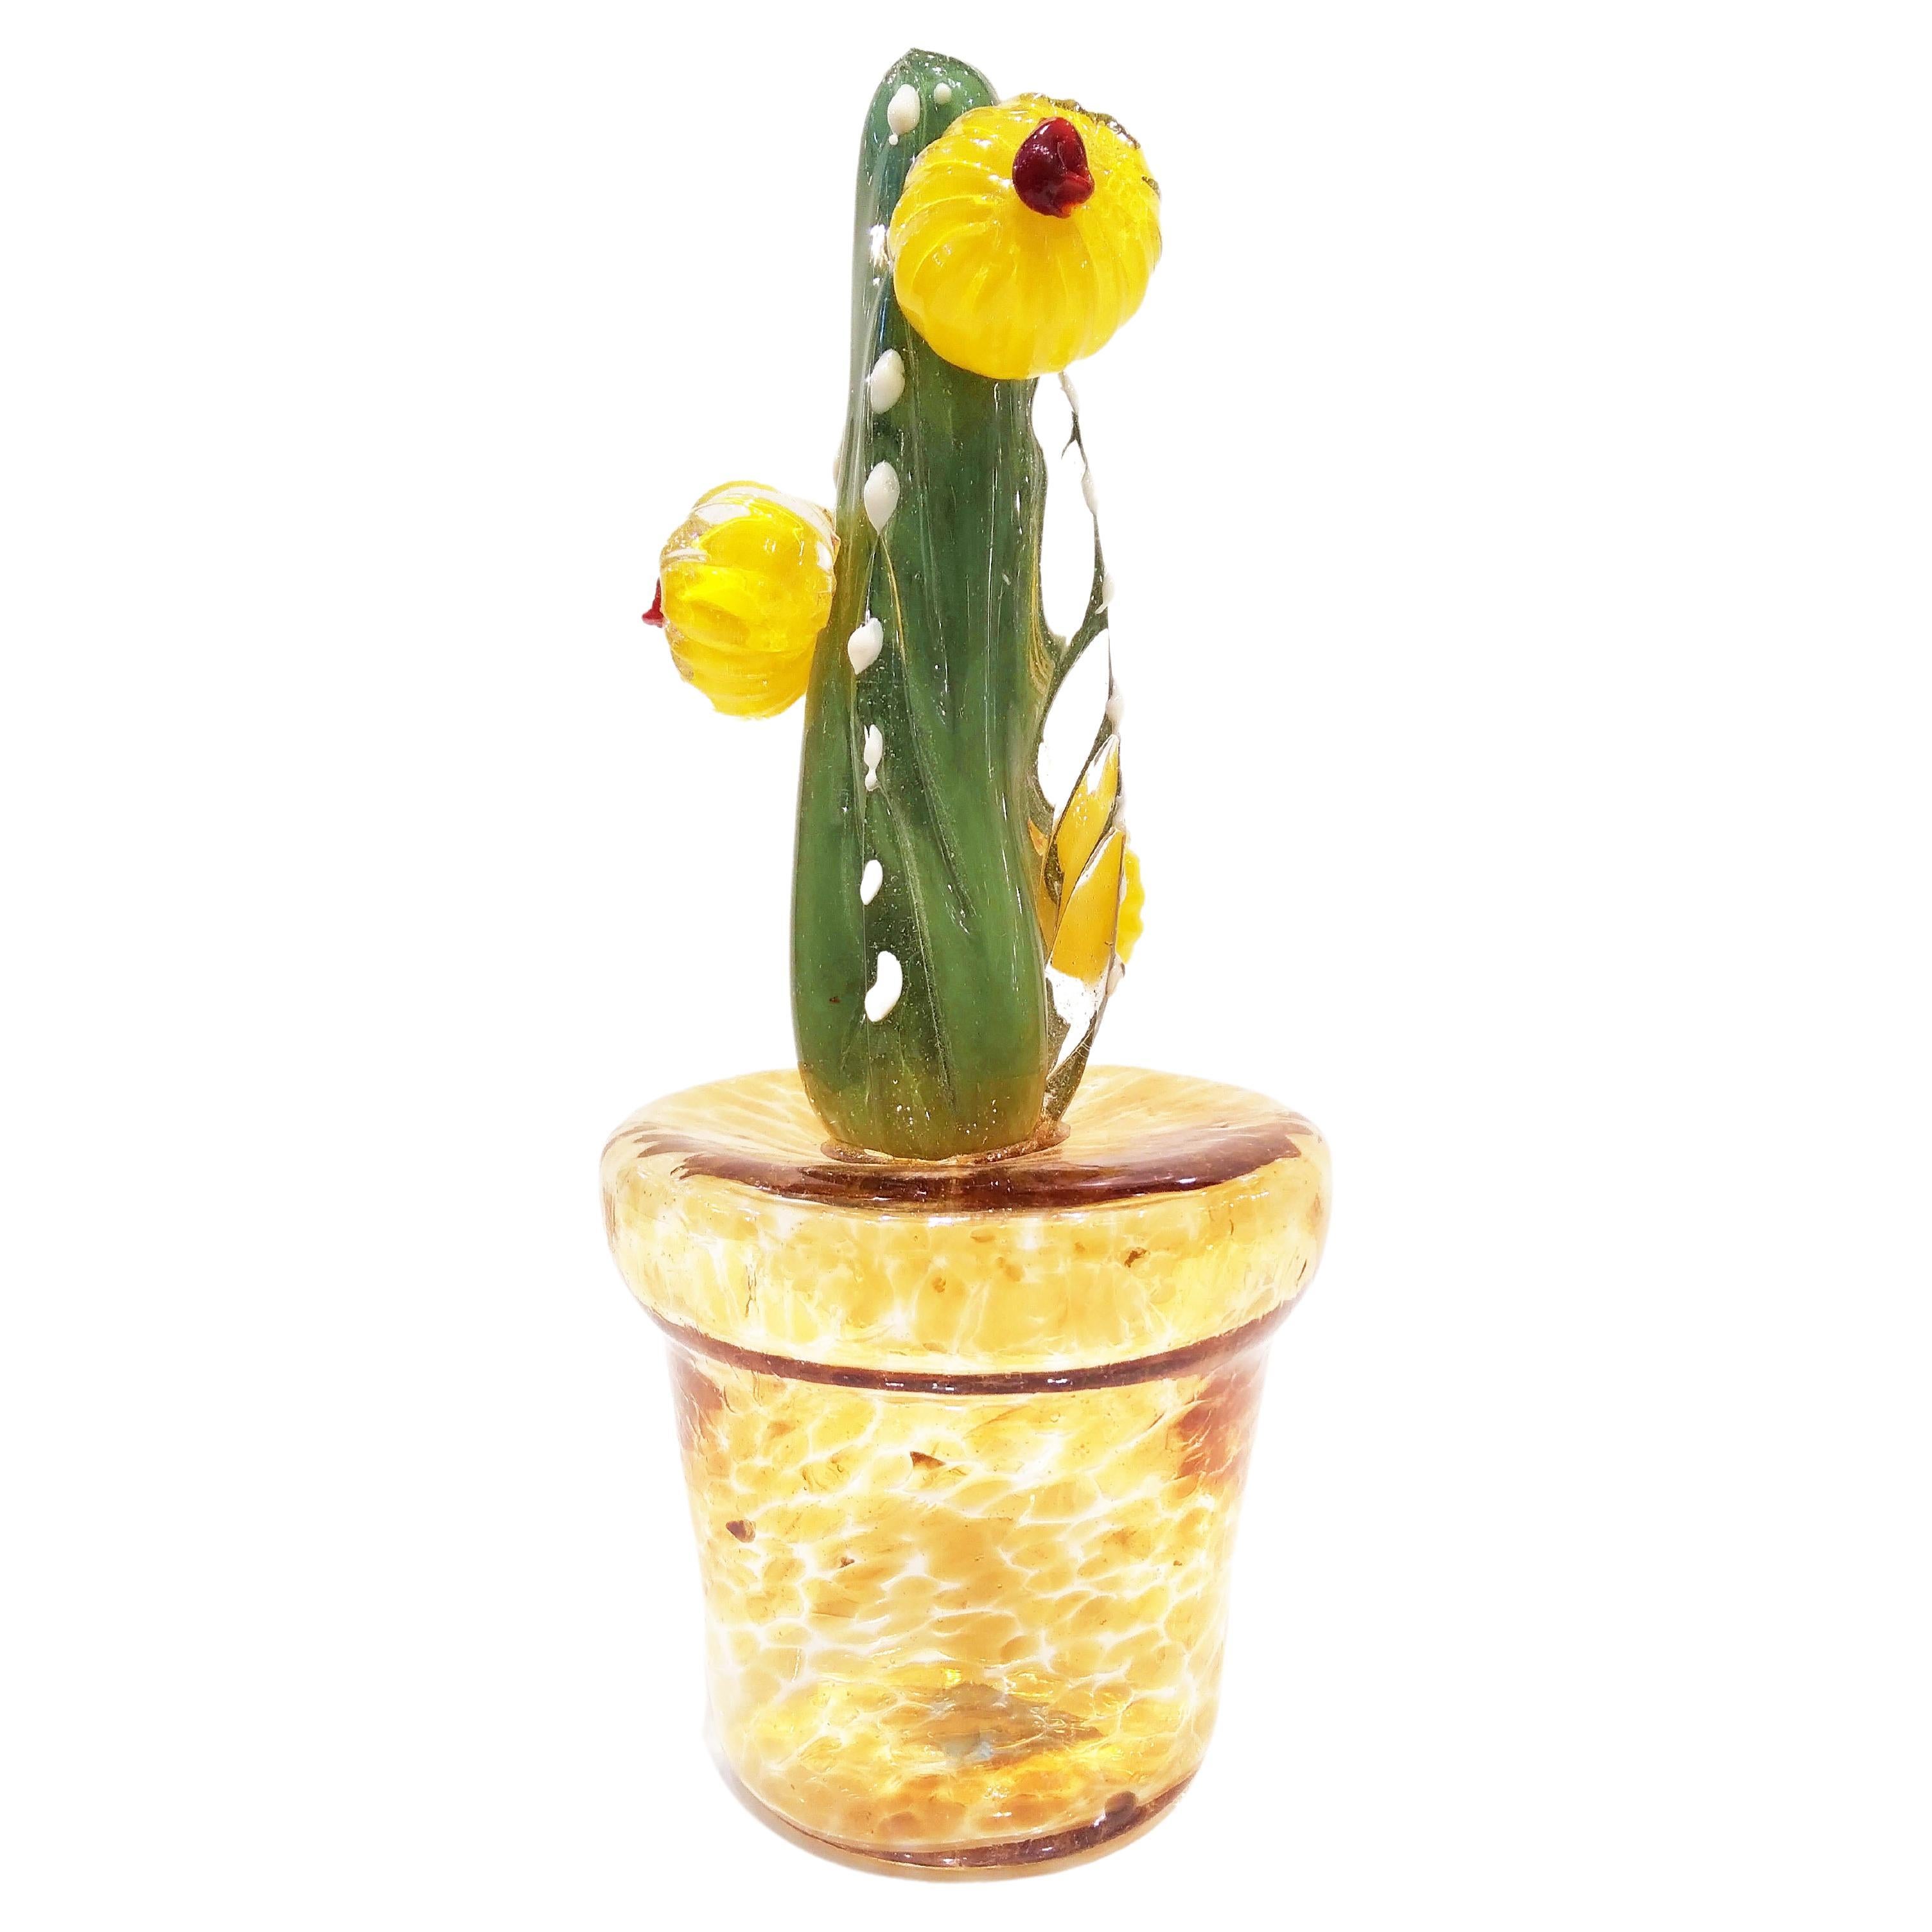 Art Glass 2000s Italian Green Murano Glass Cactus Plant with Yellow Flowers in Gold Pot For Sale